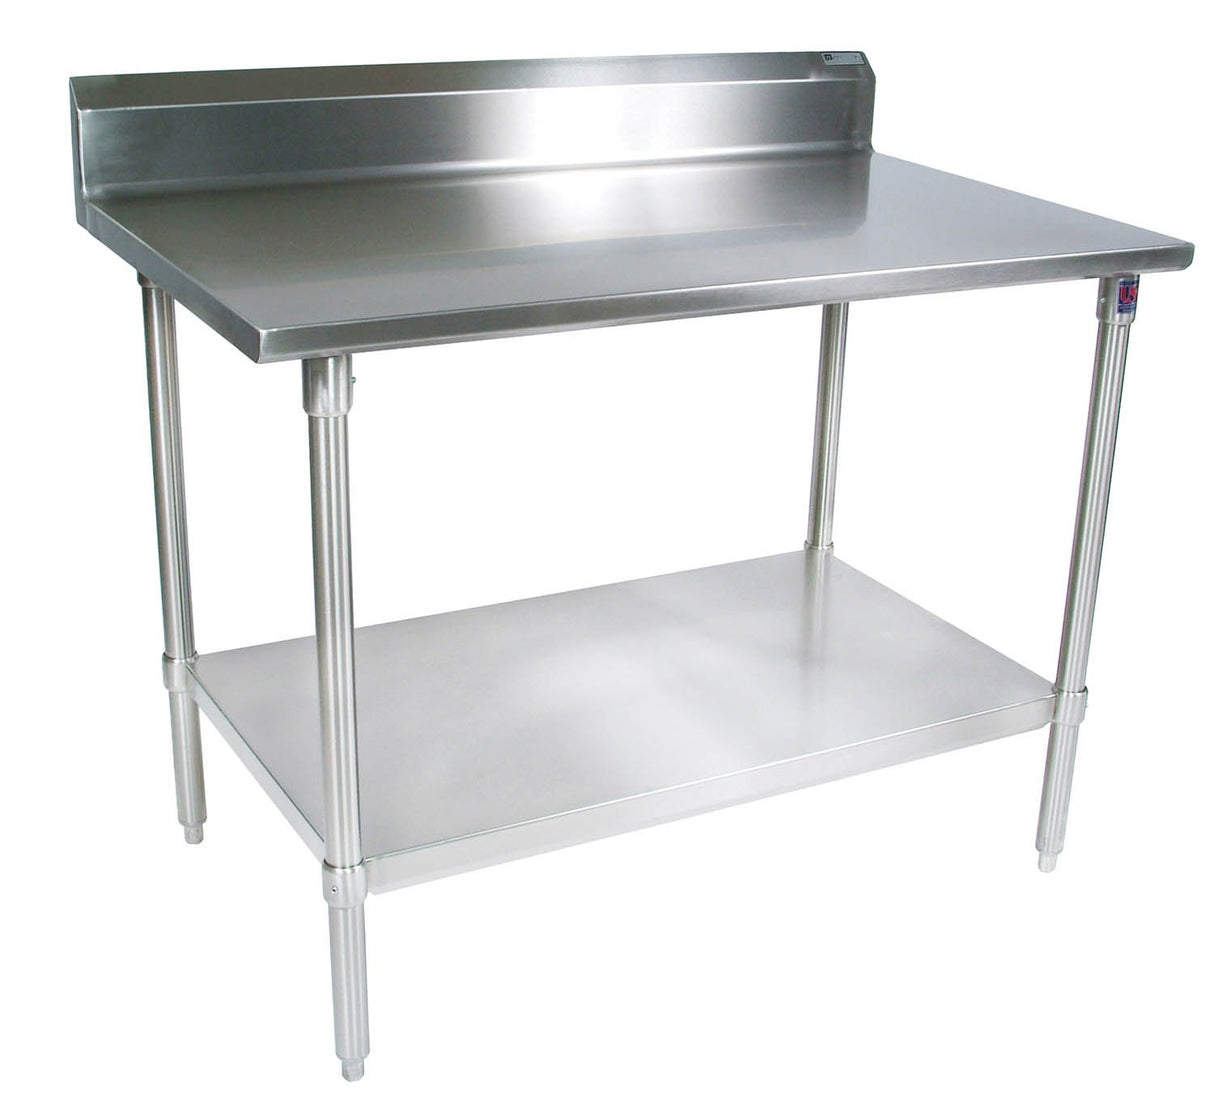 John Boos ST6R5-3636GSK 16 Gauge Stainless Steel Work Table with 5" Rear Riser, Galvanized Base and Shelf, 36" x